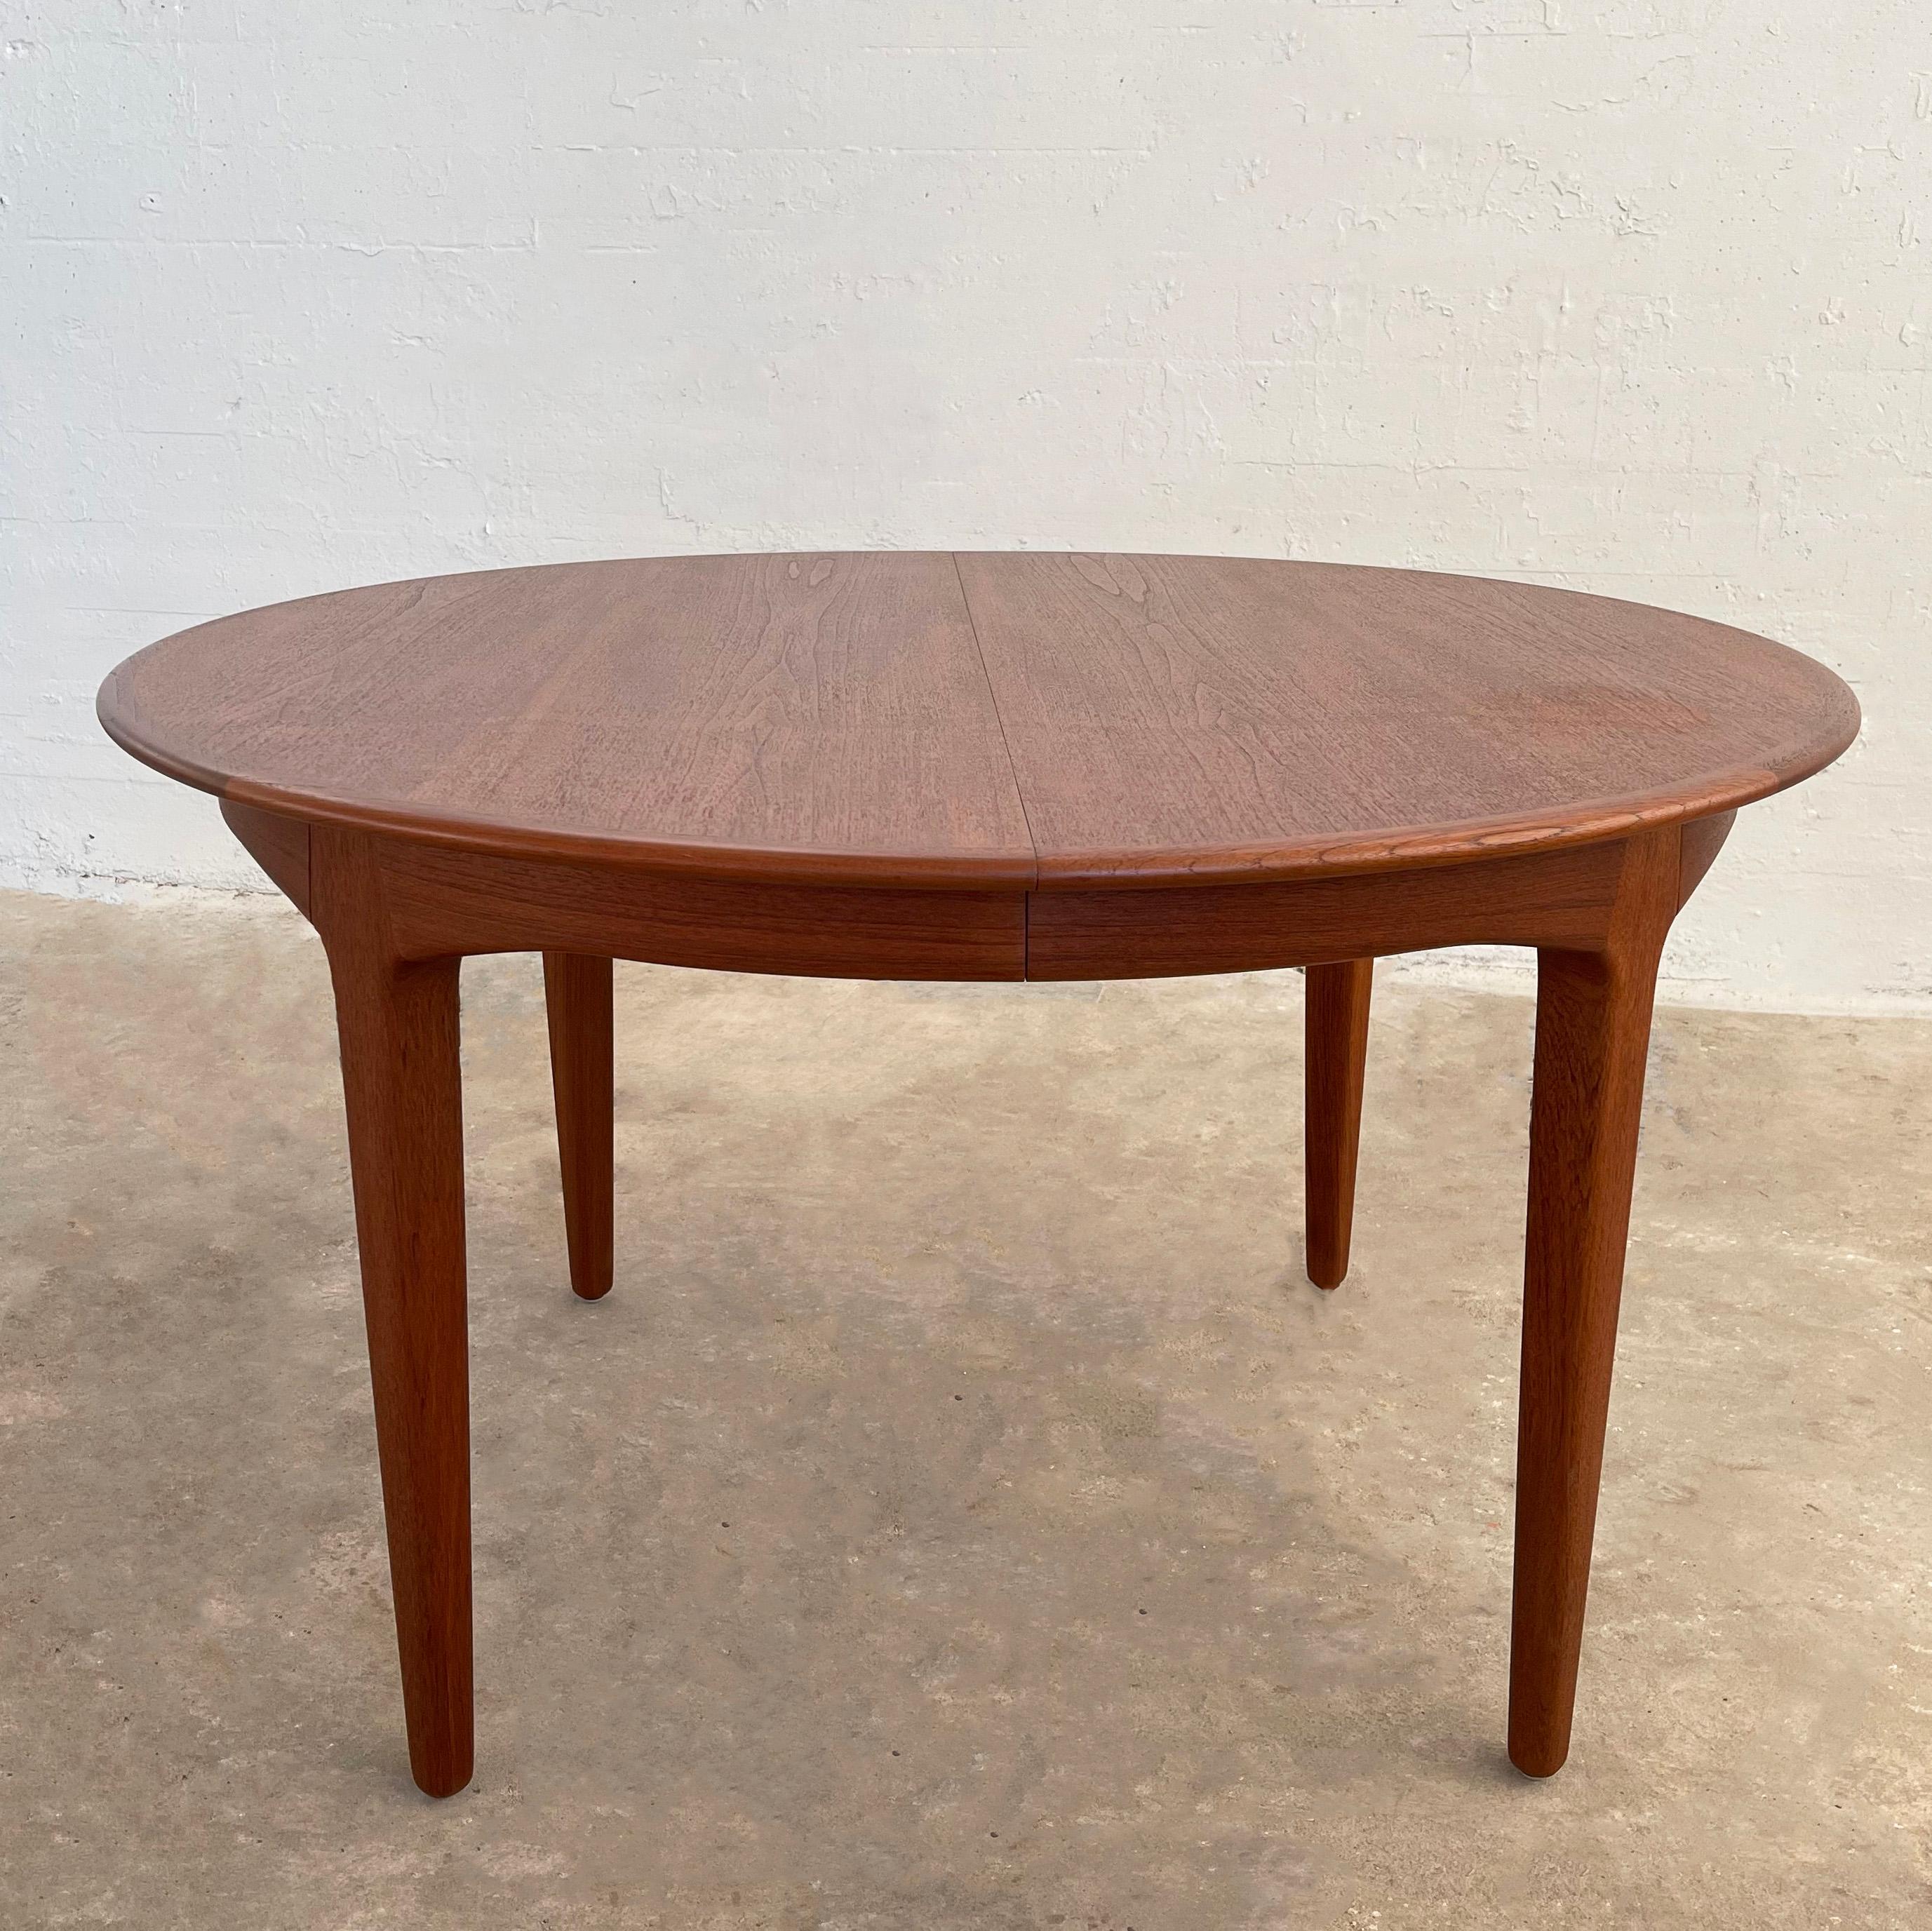 Danish modern, round, teak dining table by Danish architect Henning Kjaernulf for Soro Stole expands from 49 - 89 inches with two separate 20 inch leaves. The table comfortably seats 4 and expands to accommodate up to 8 guests. It's an elegant